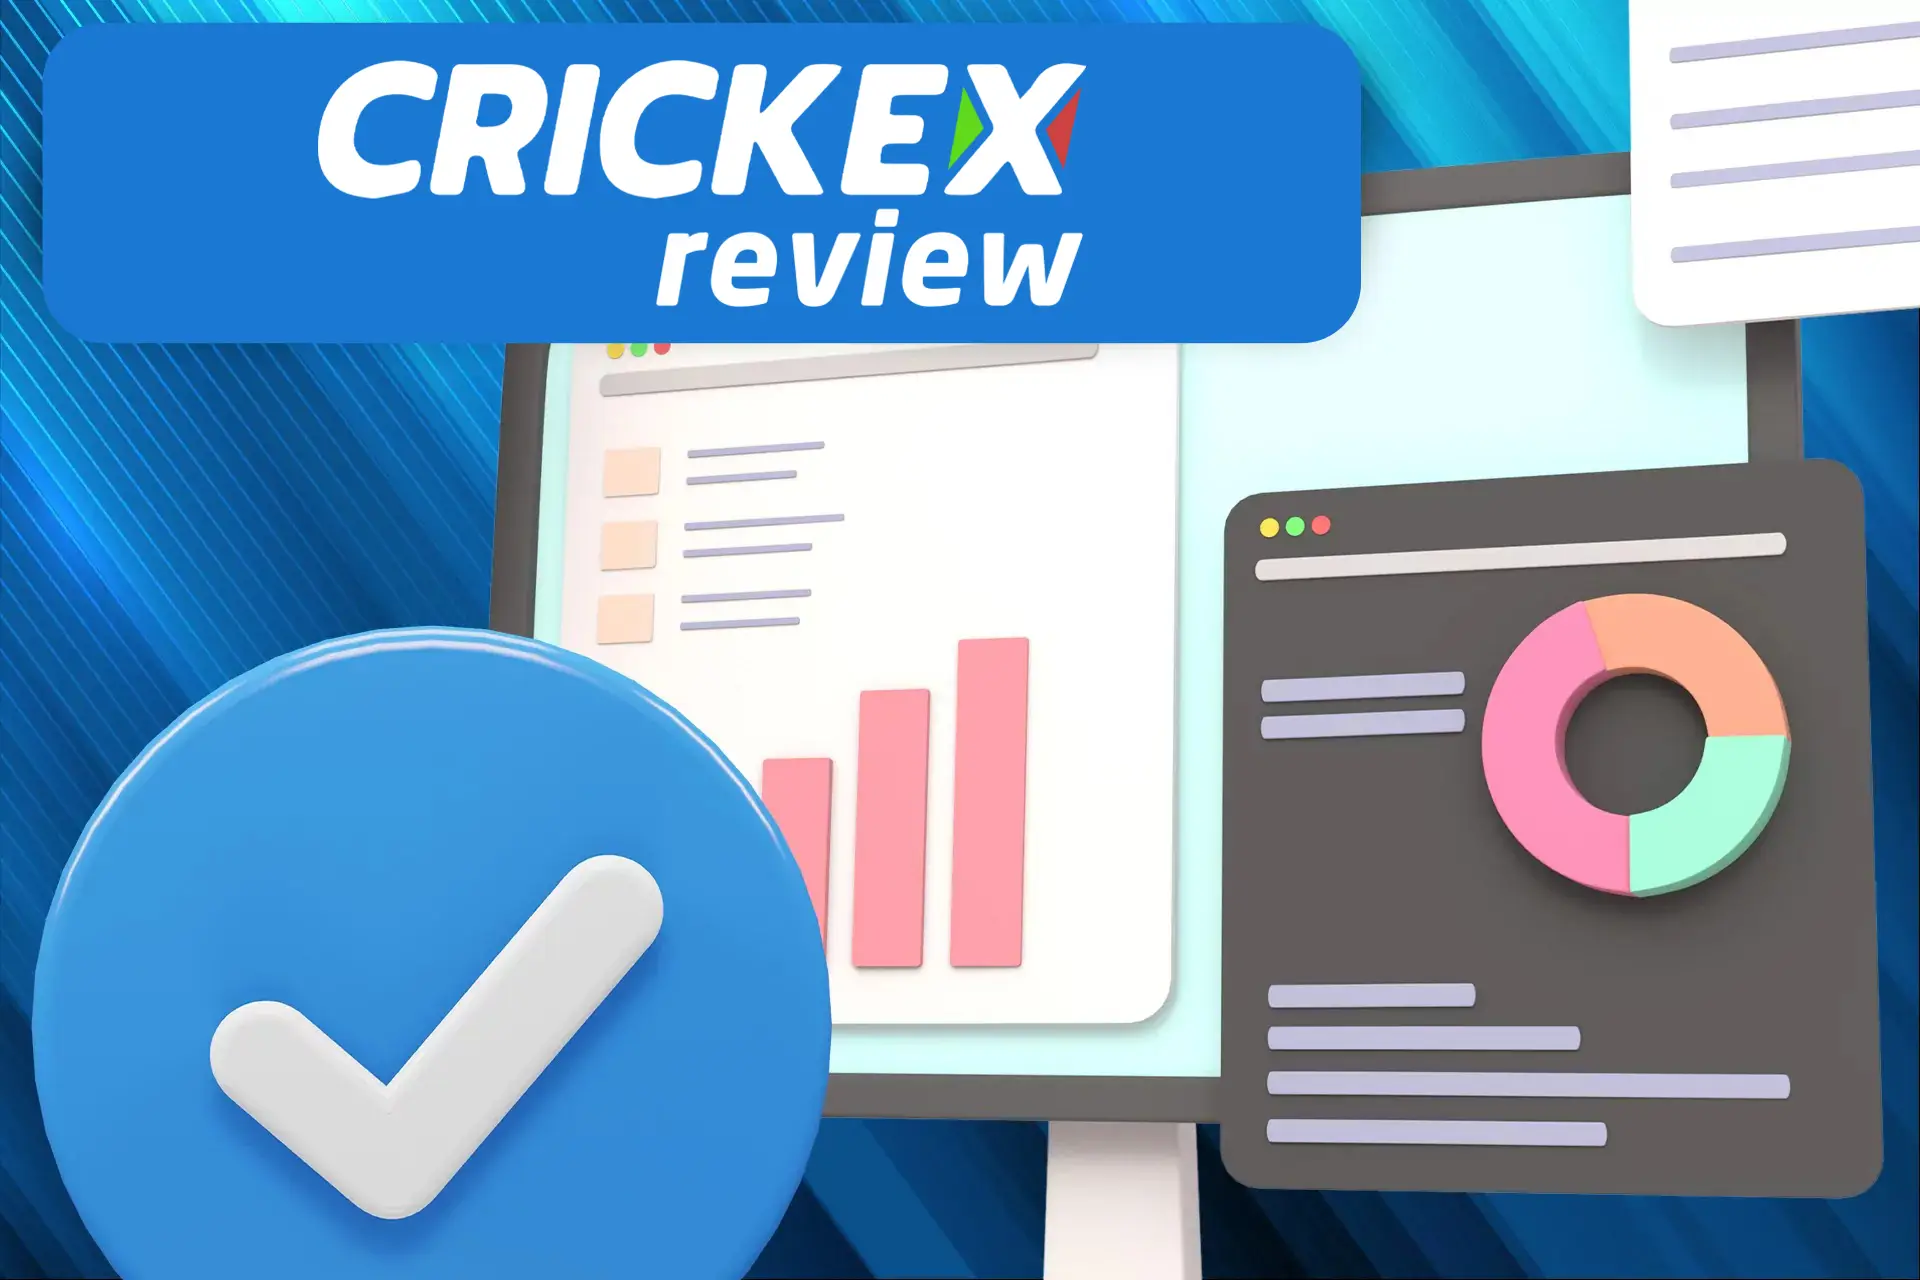 Crickex collects your data only to make your gambling experience better.